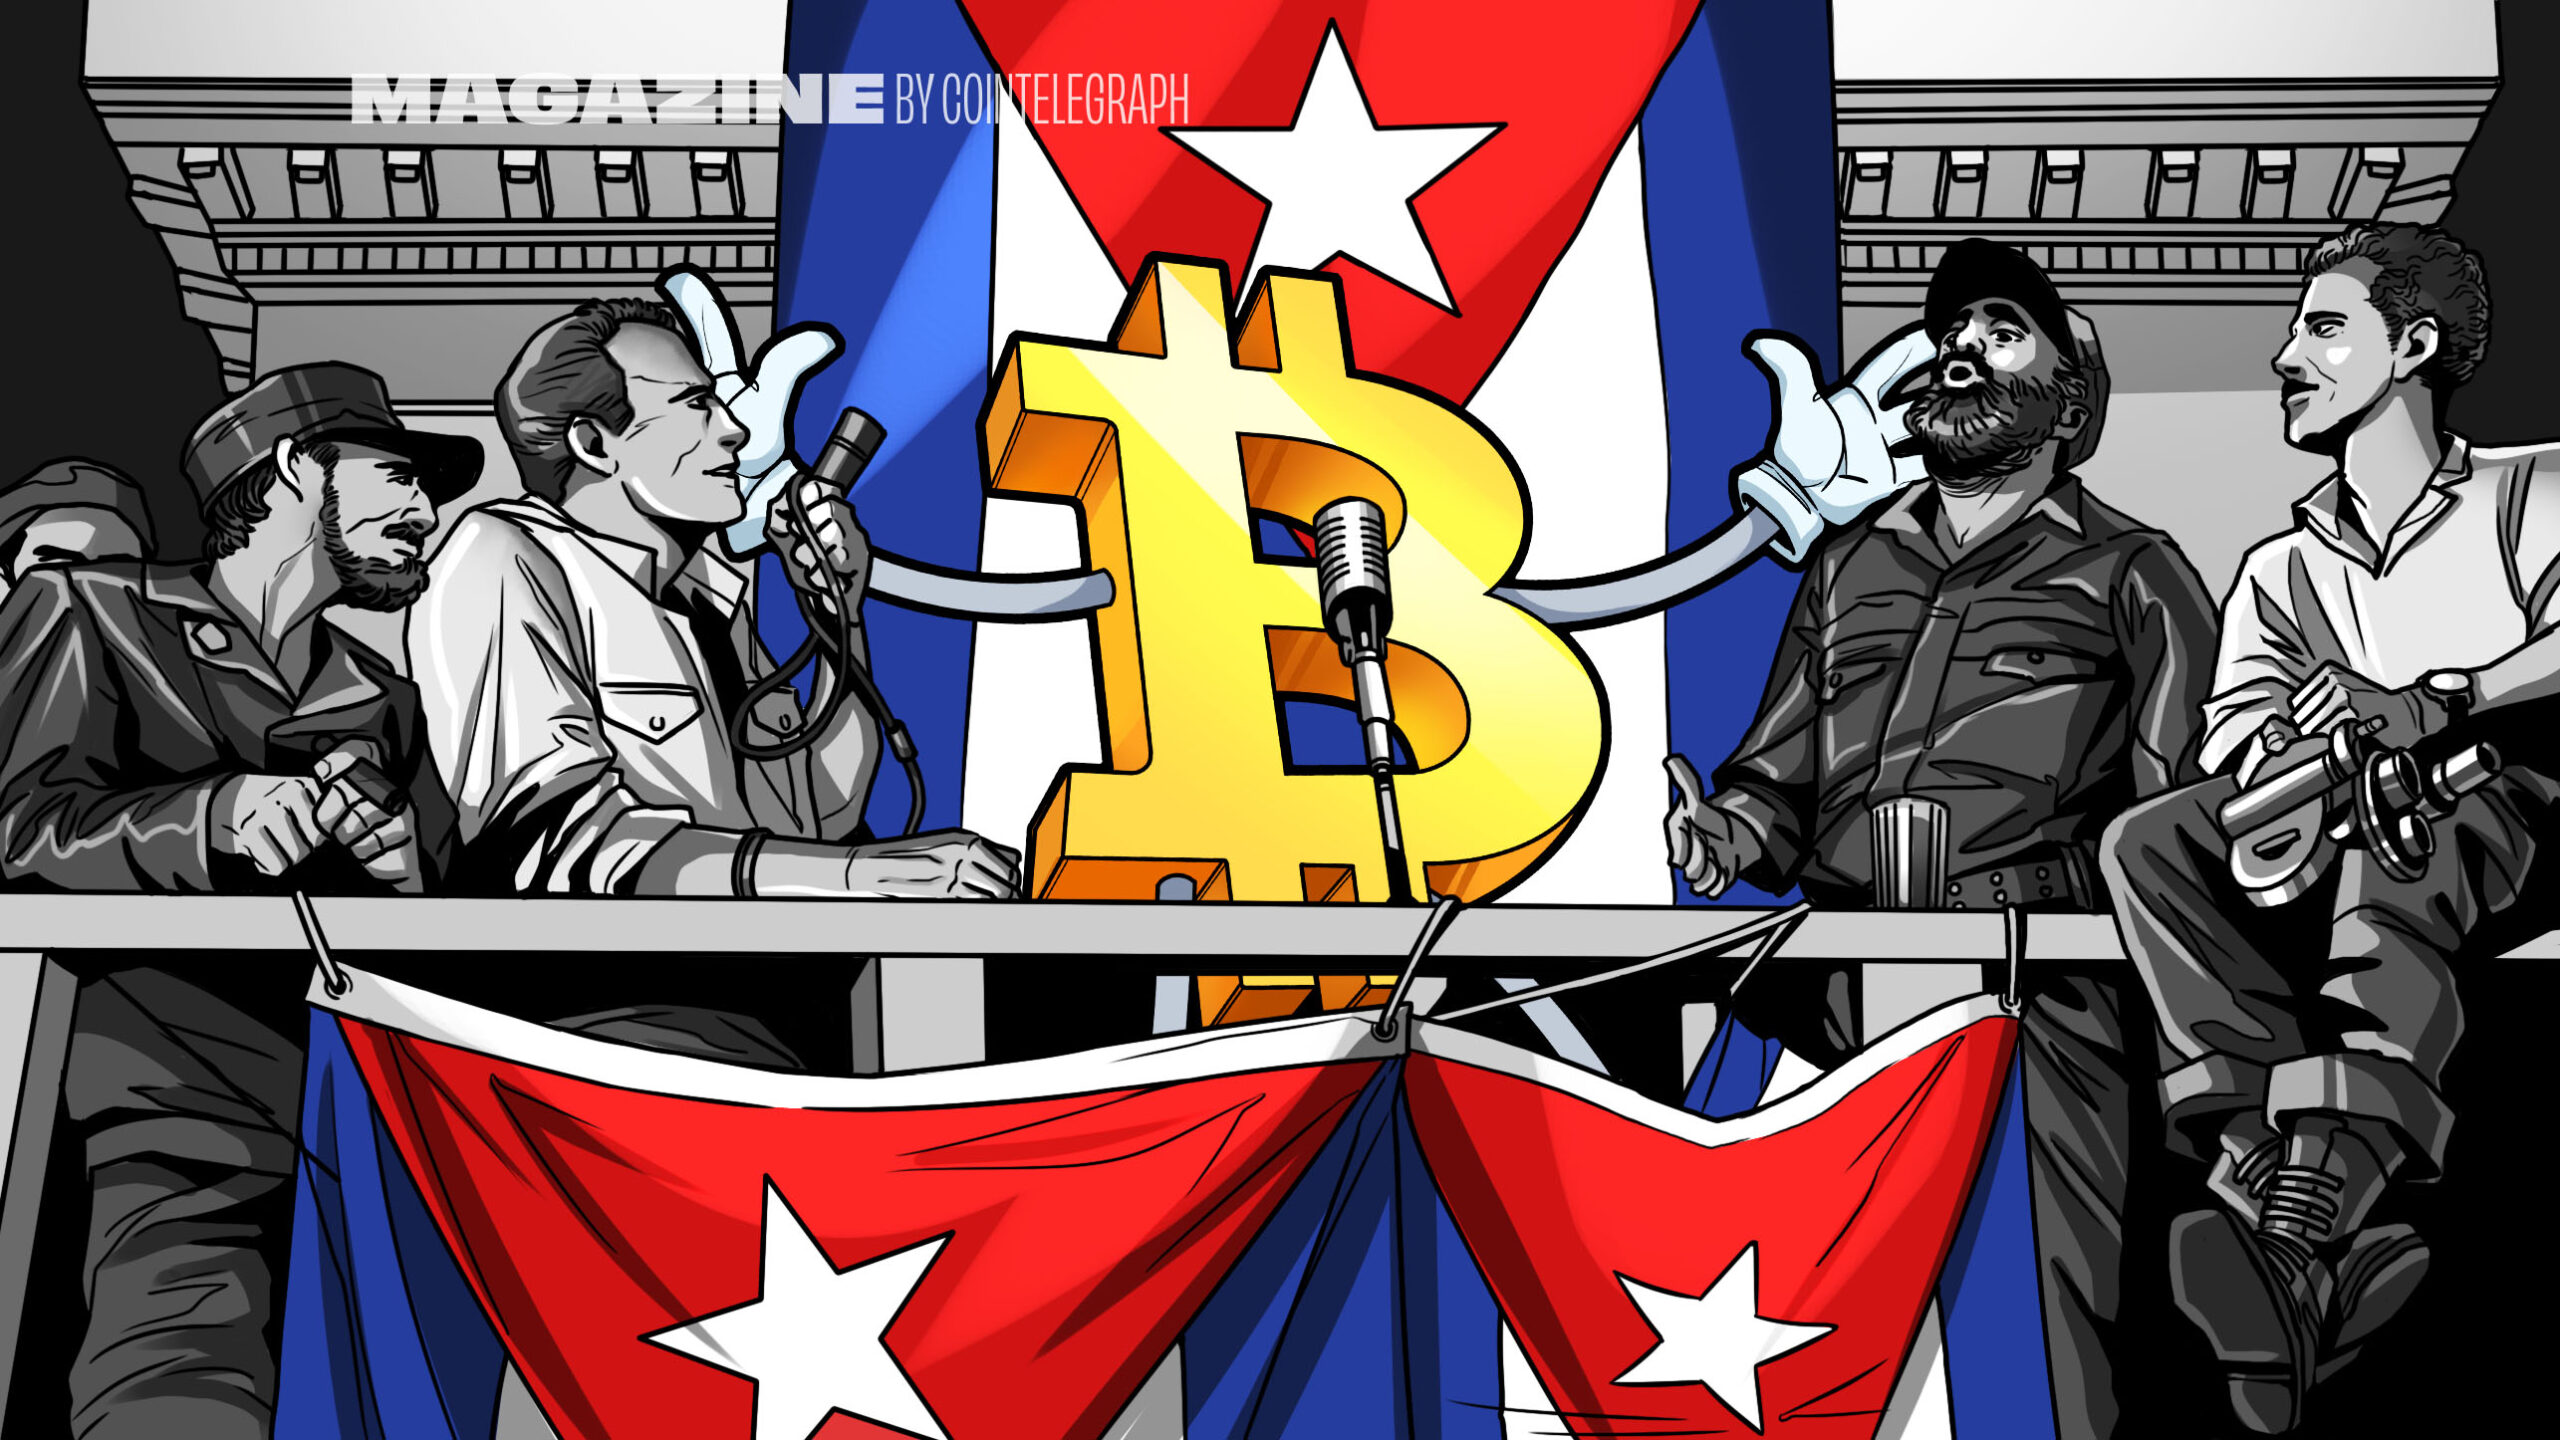 The-truth-behind-cuba’s-bitcoin-revolution:-an-on-the-ground-report